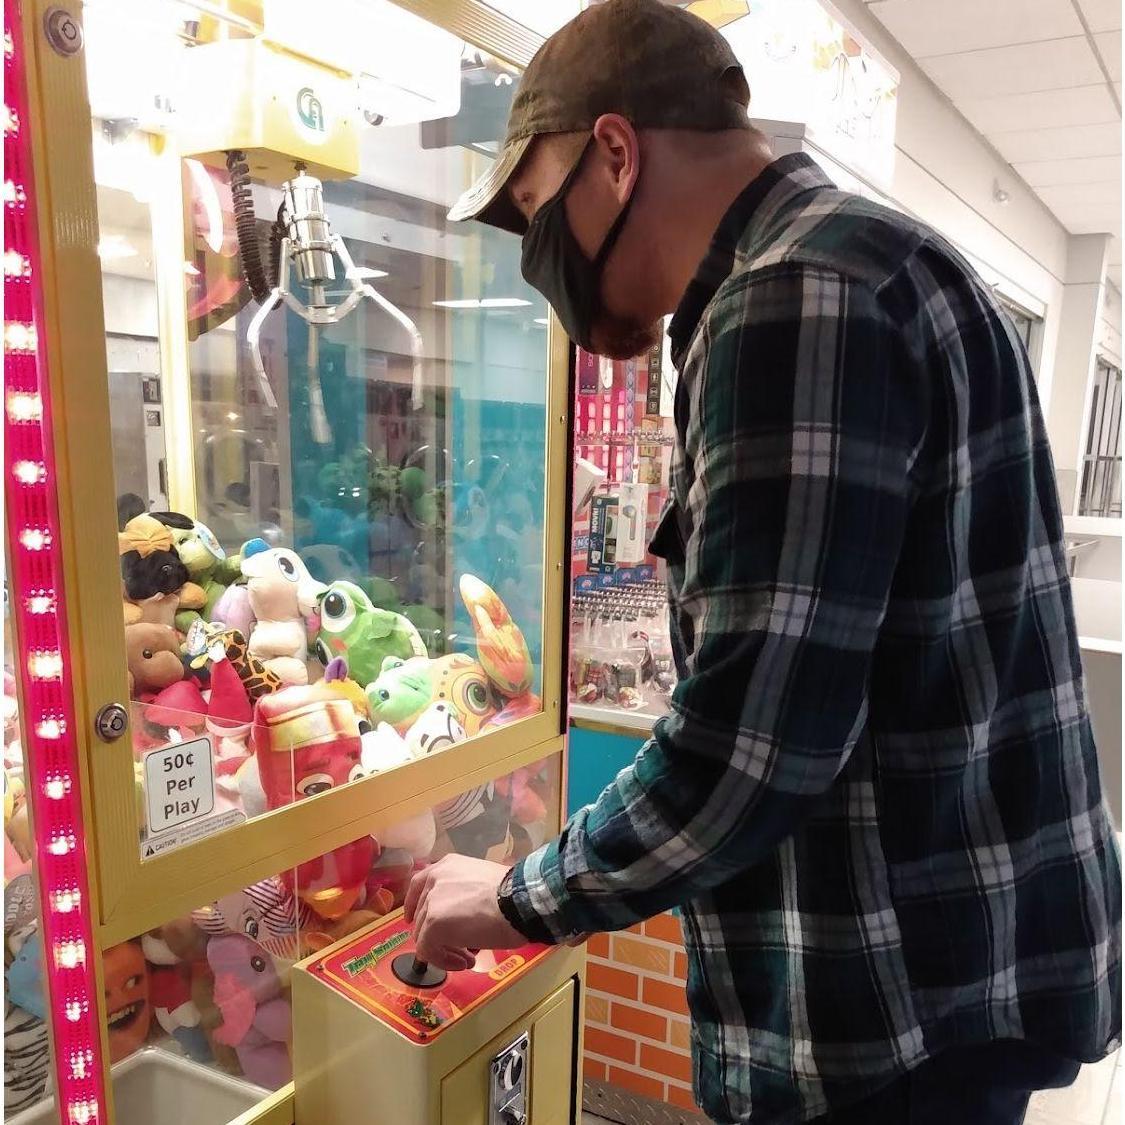 Devon winning Anna a prize from the claw machine at a laundromat